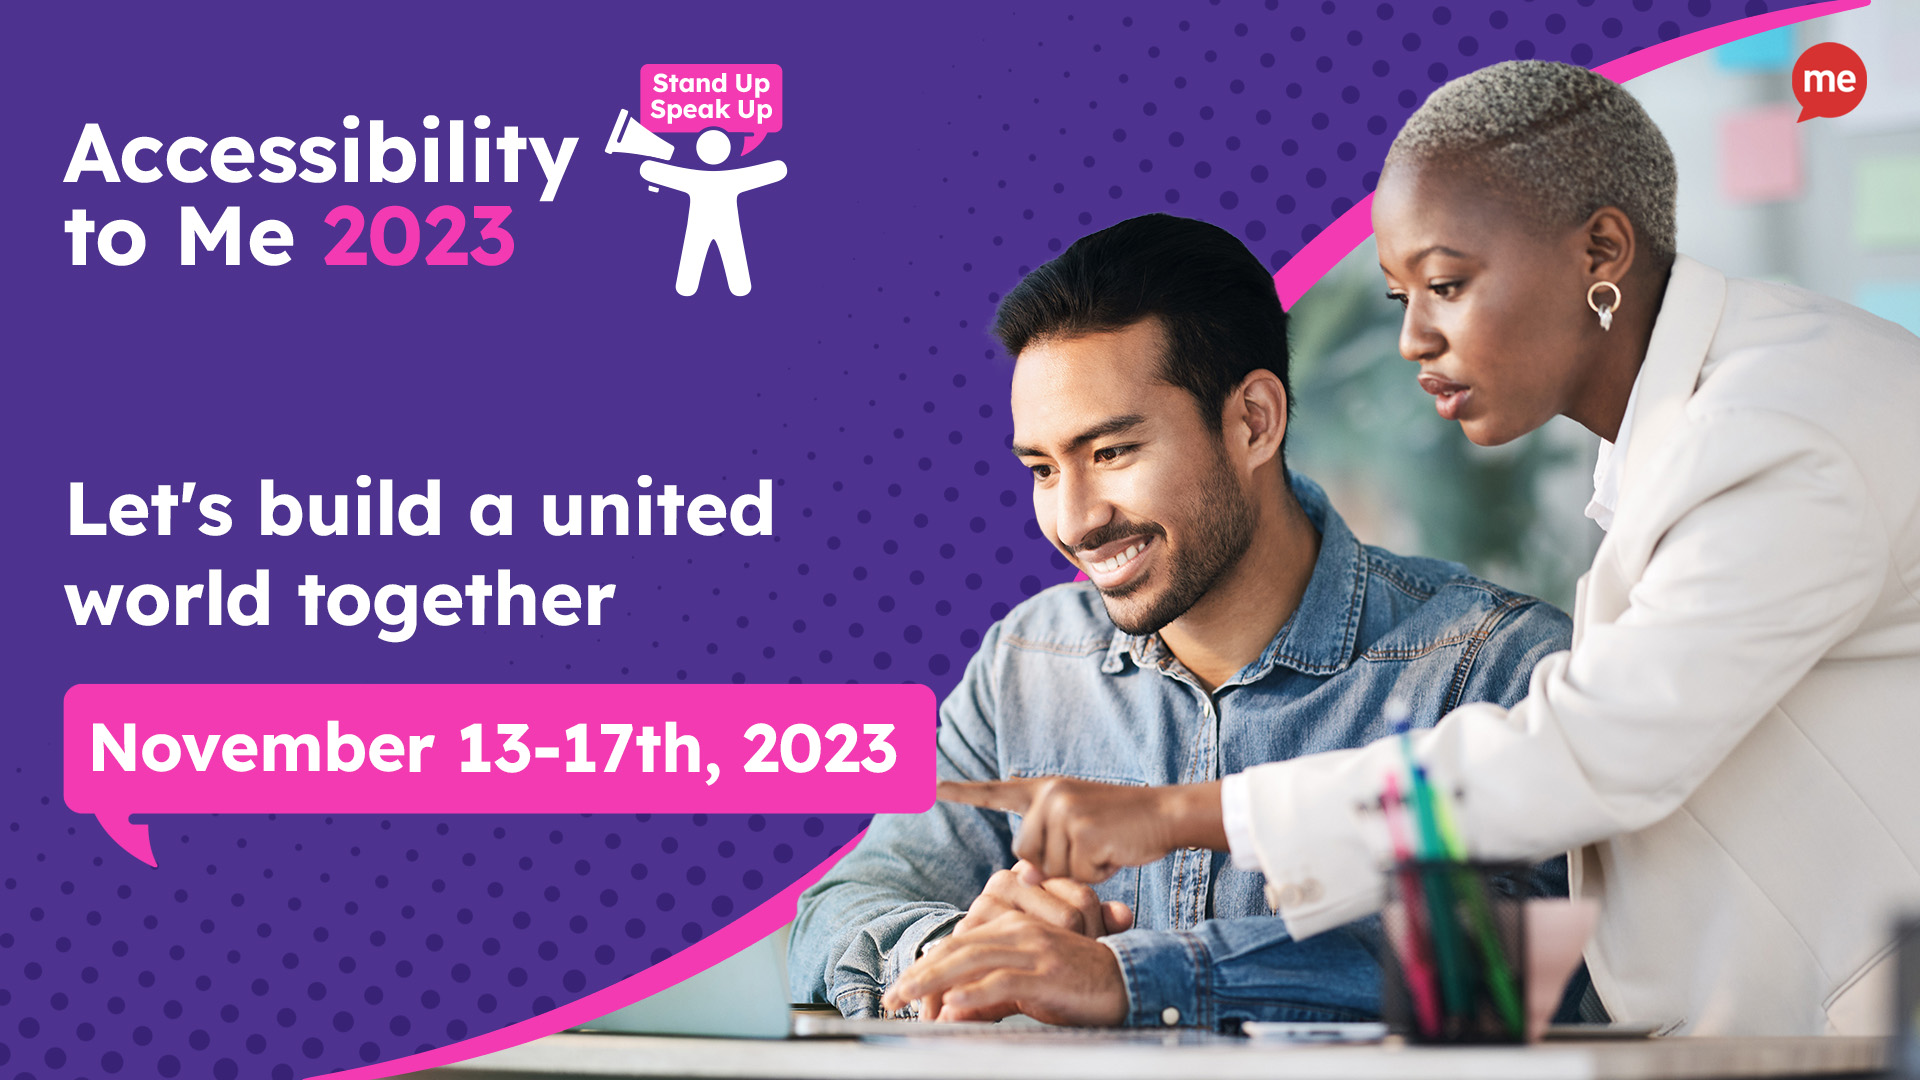 Accessibility to Me 2023. Let's Build a united world together. November 13th-17th, 2023